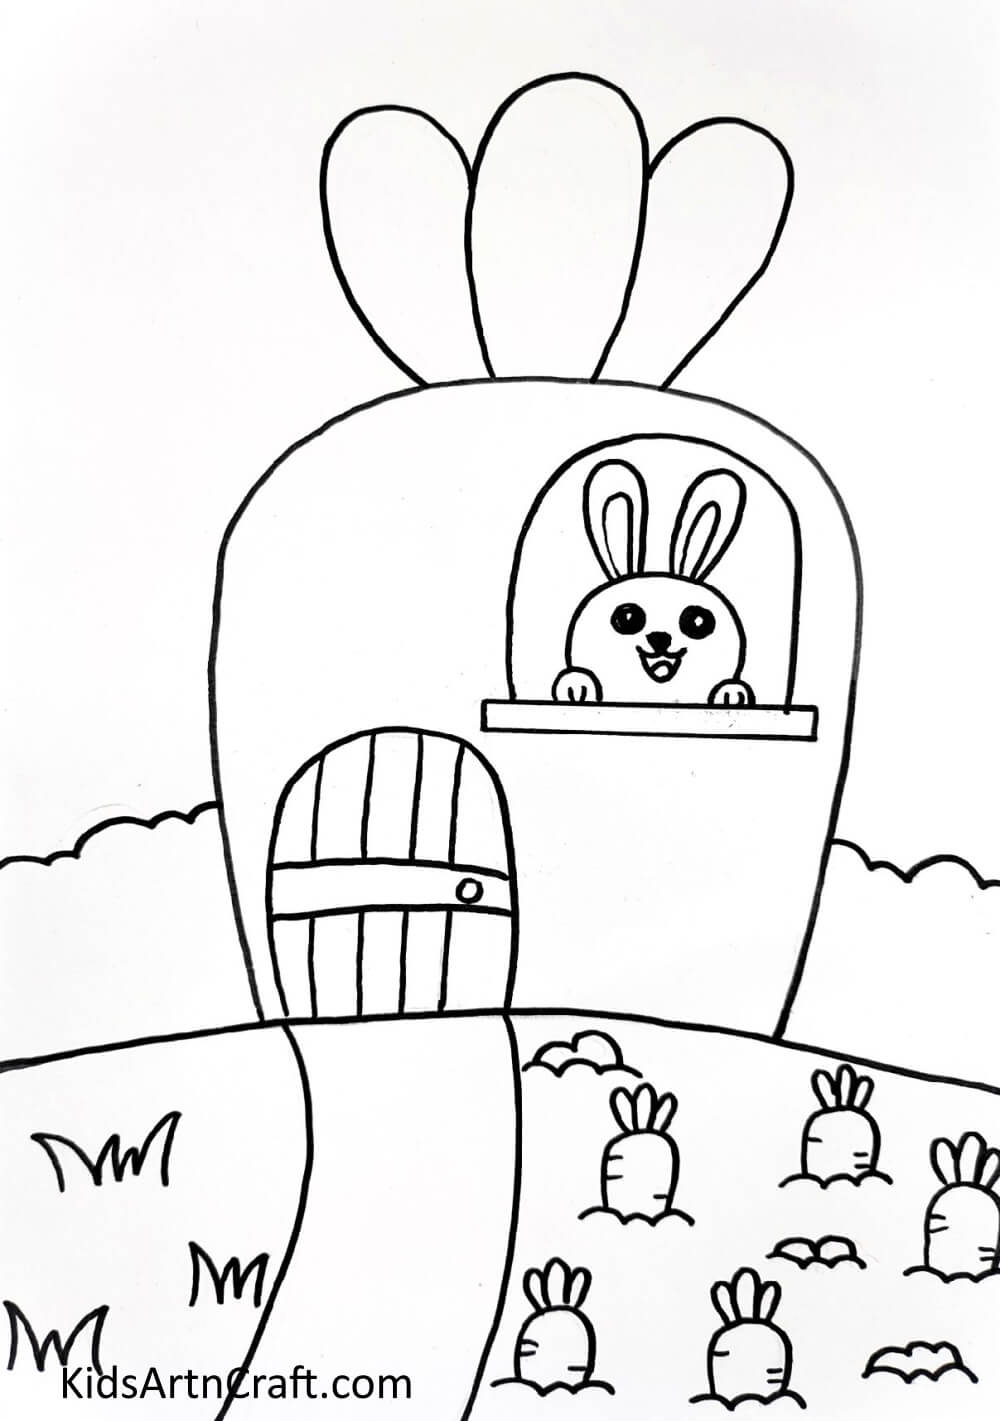 Completing The Garden Of Bunny House - Follow this Tutorial to Create a Bunny House